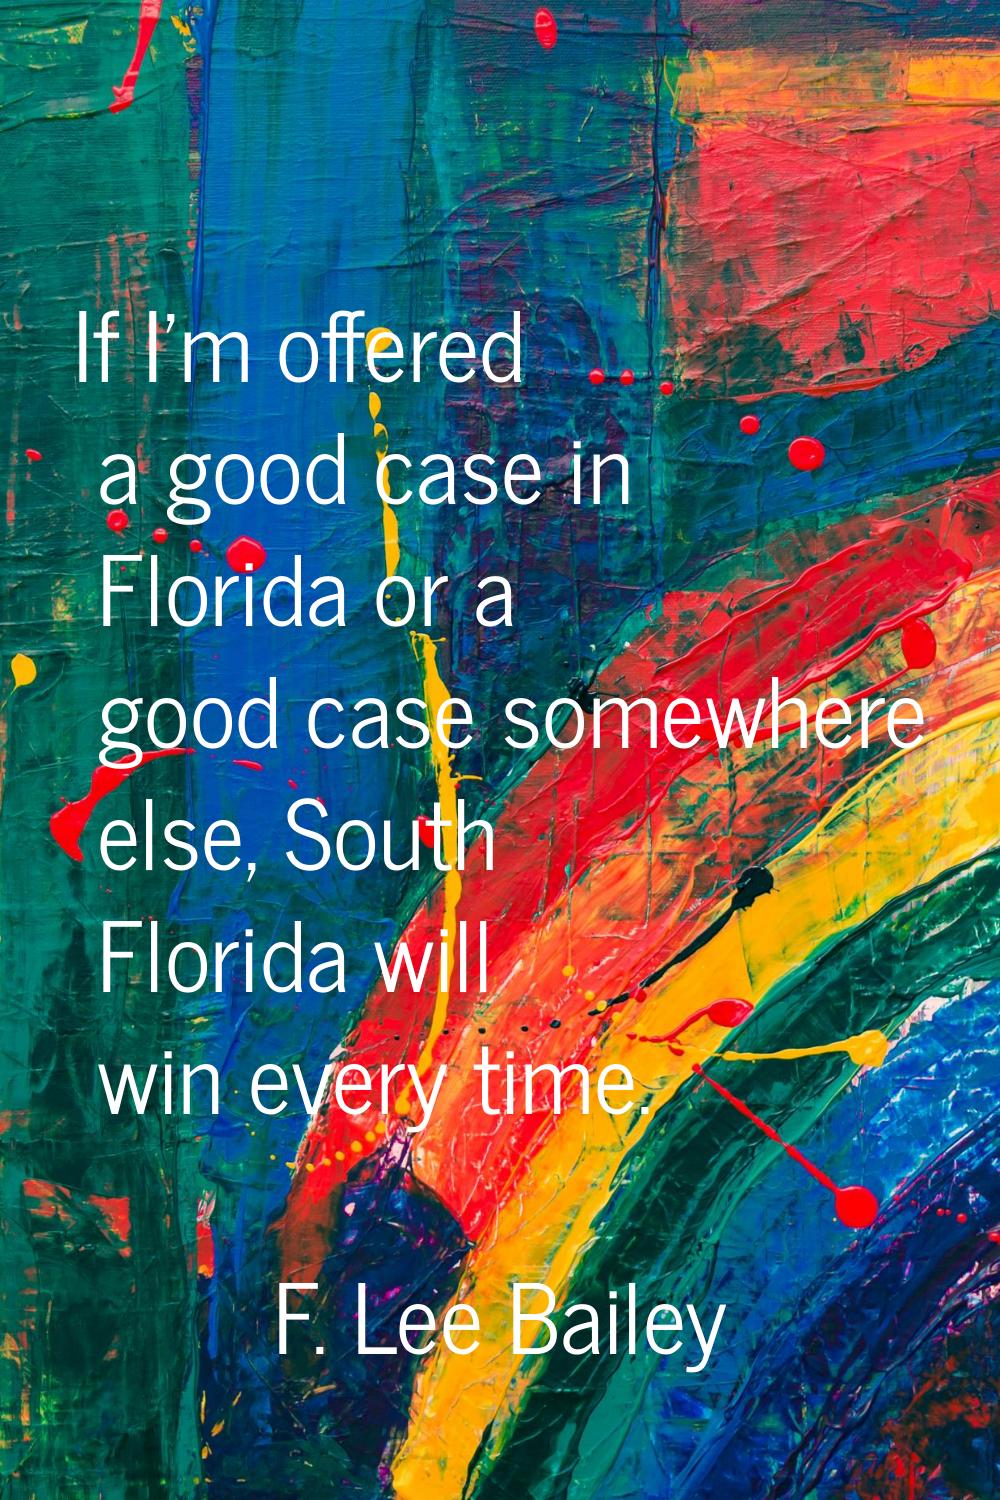 If I'm offered a good case in Florida or a good case somewhere else, South Florida will win every t